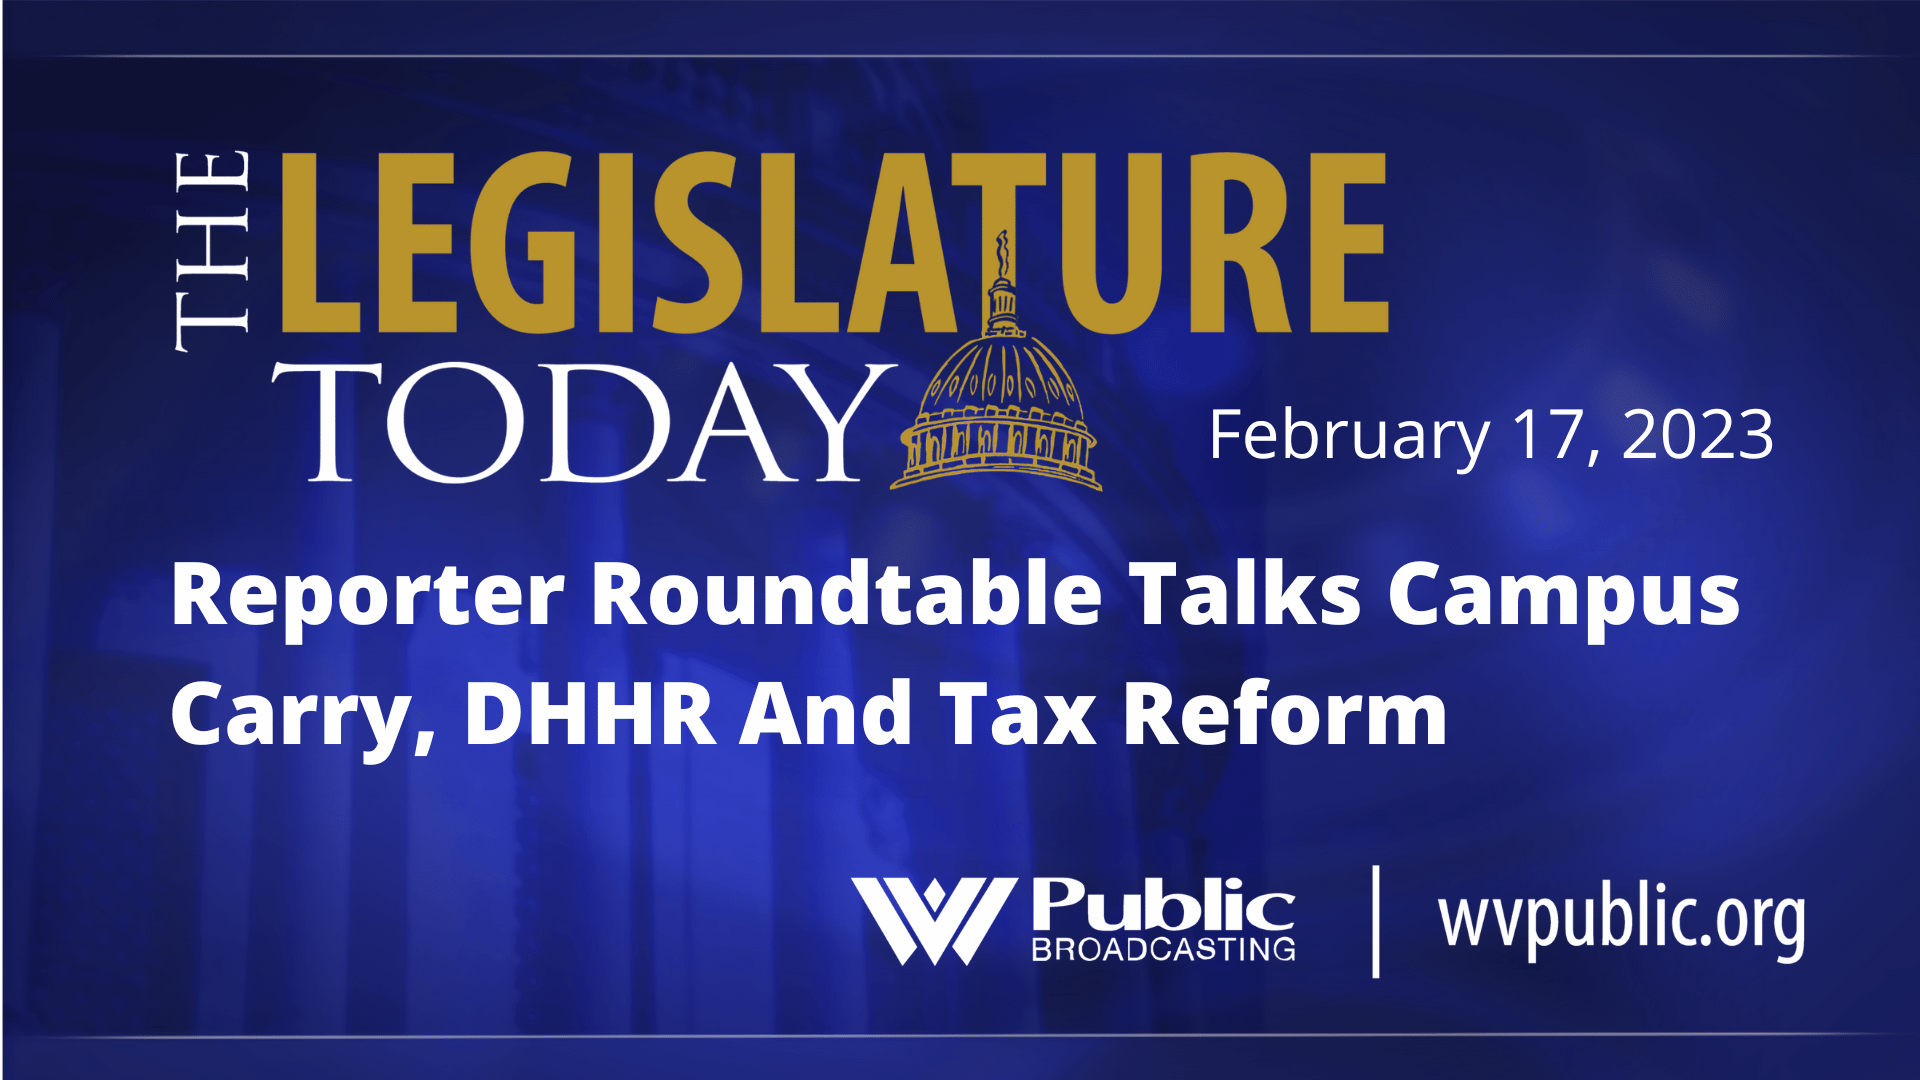 Reporter Roundtable Talks Campus Carry, DHHR And Tax Reform